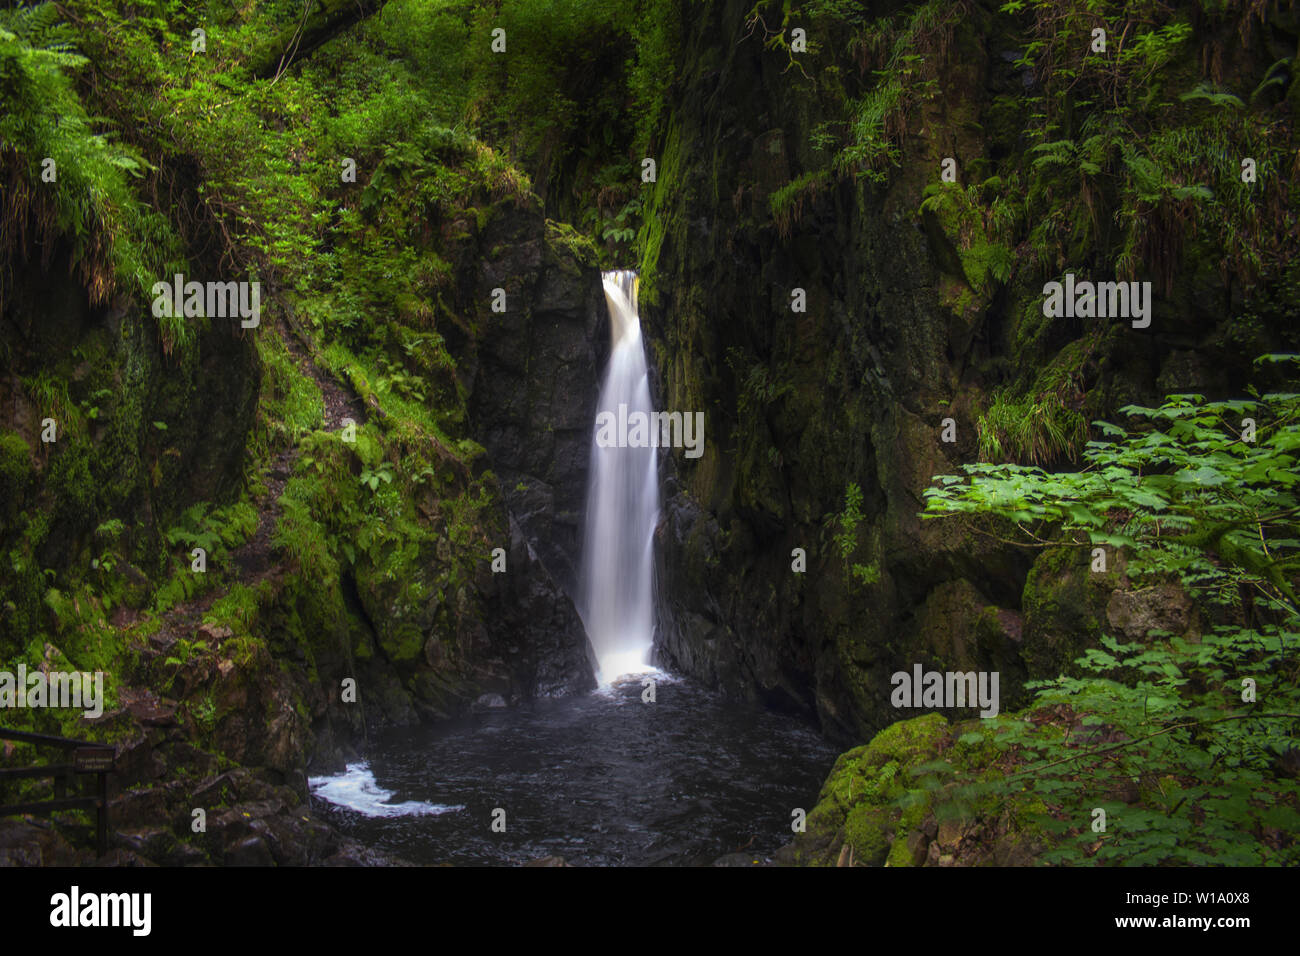 The Stanley Ghyll Force Waterfall (called also Clear Force) in an enchanted green and wild forest. Lake District National Park, Cumbria, England, UK. Stock Photo